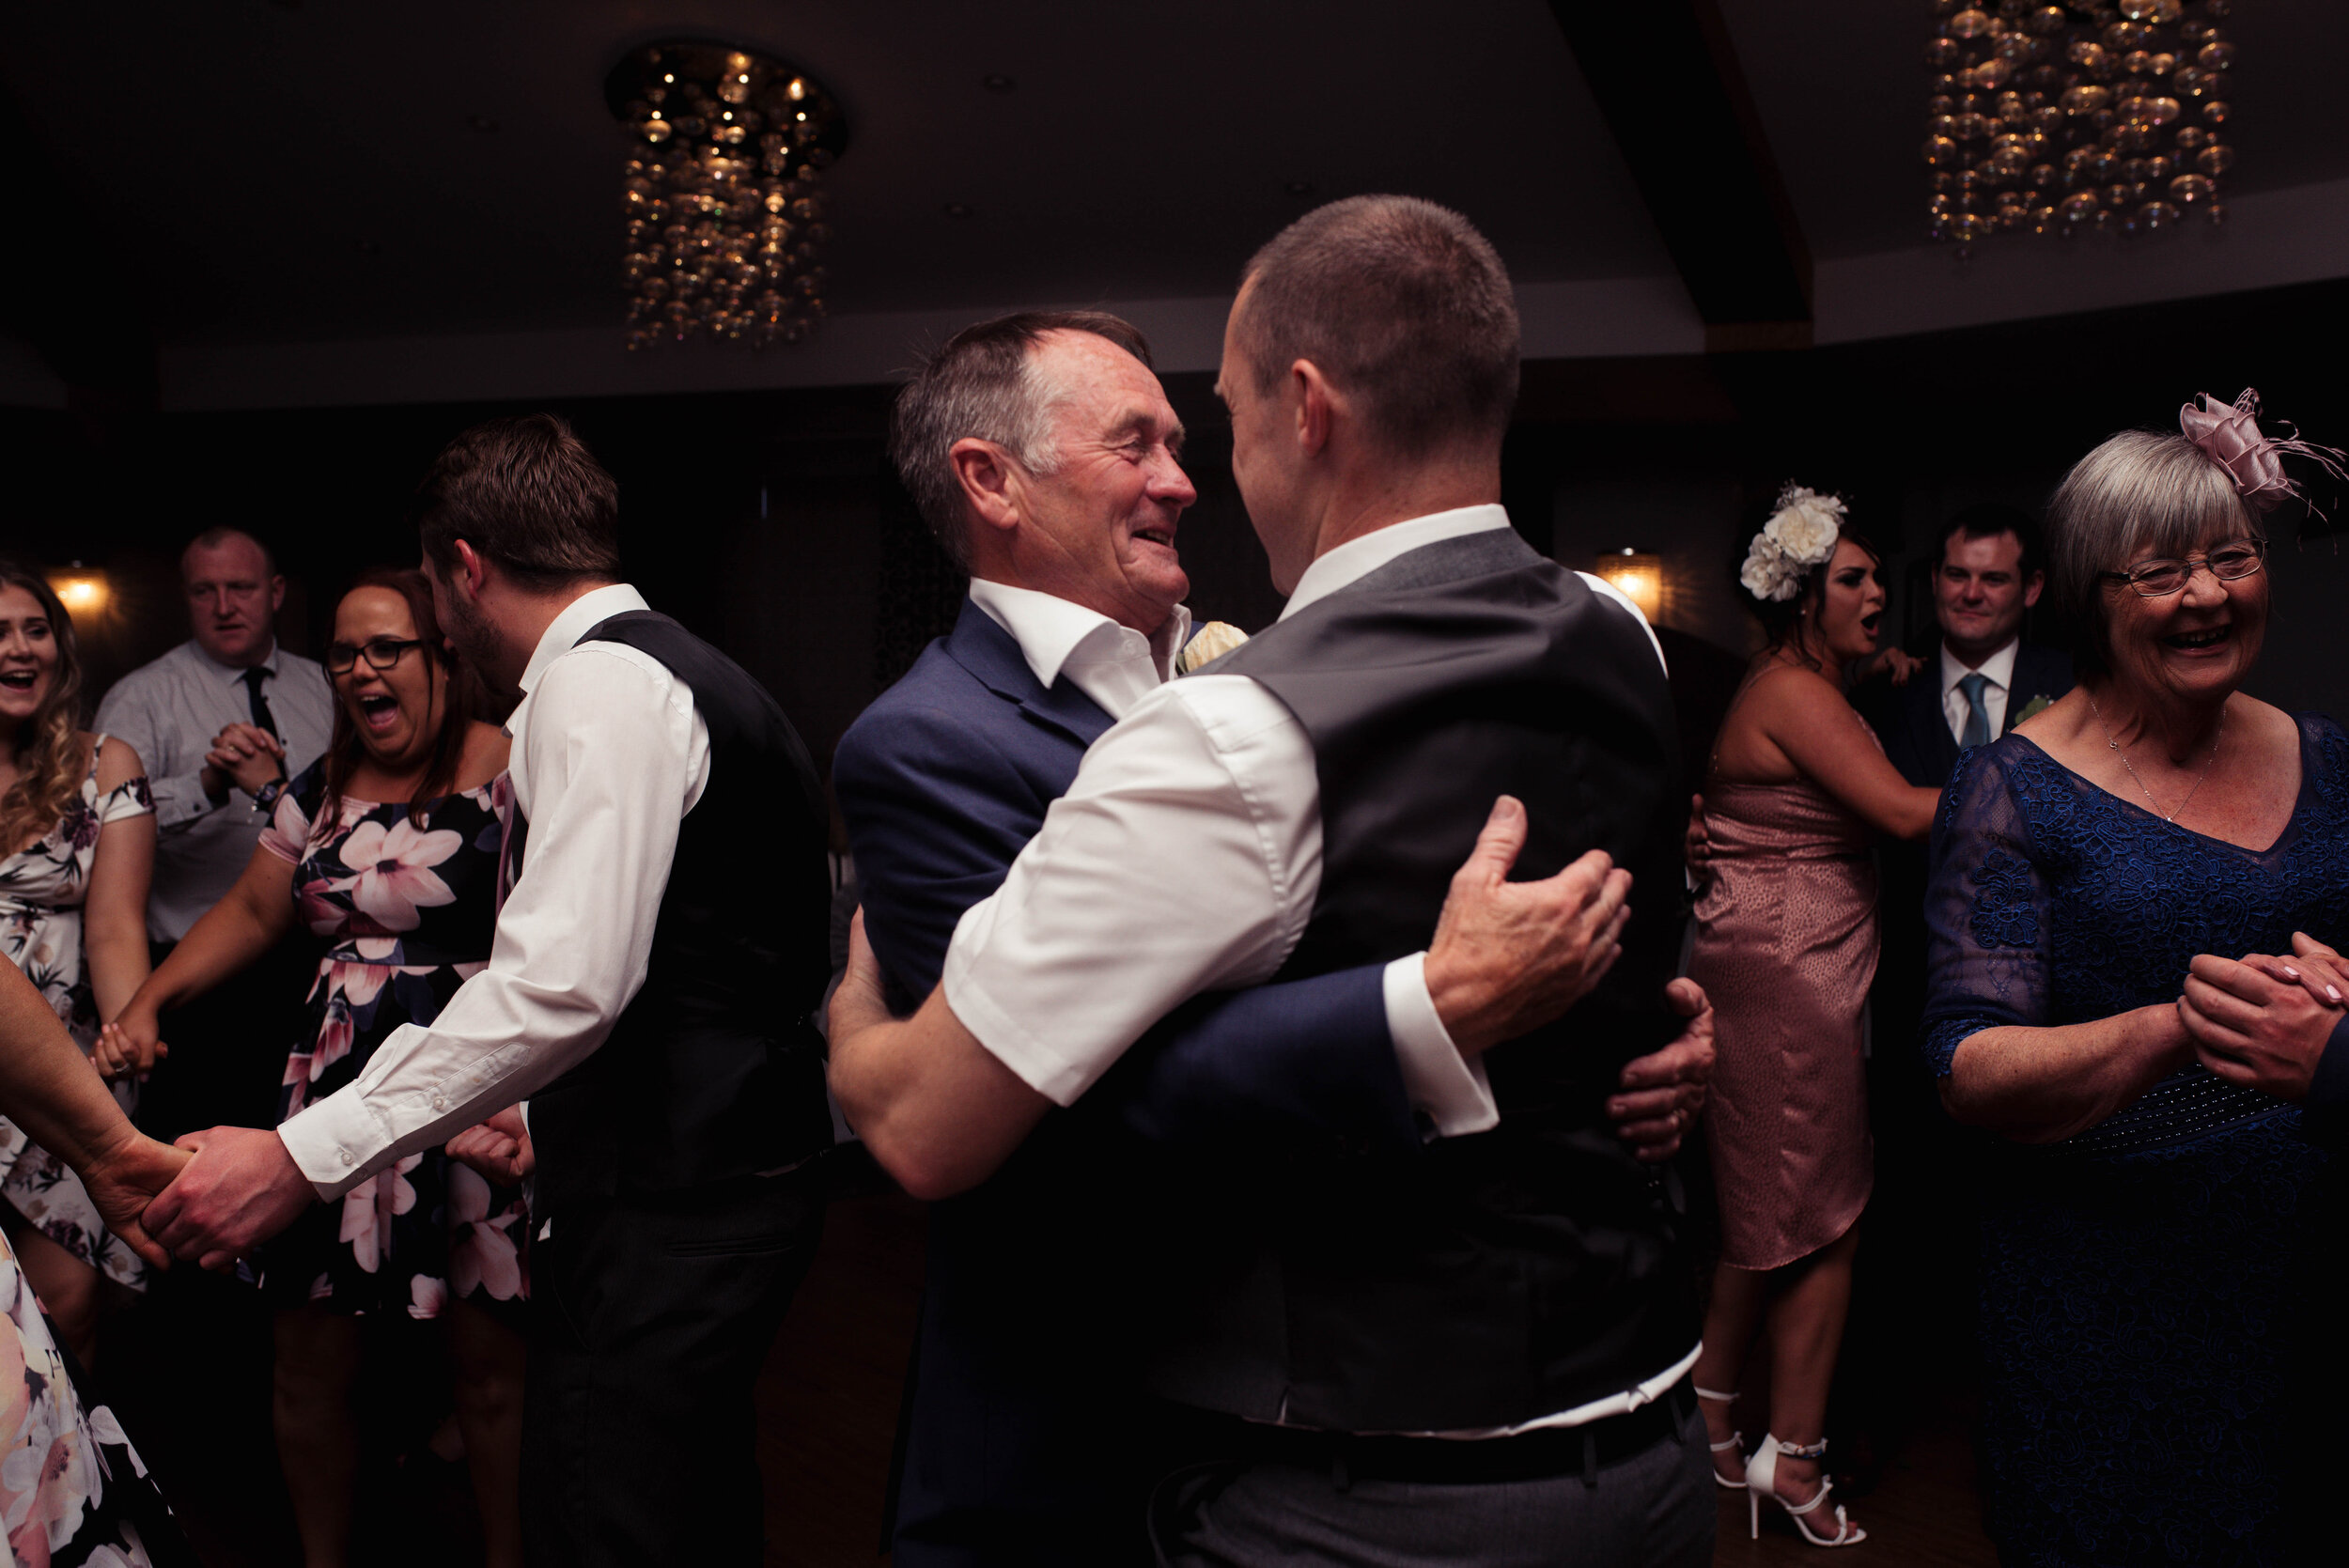 Father and son dance on the dance floor